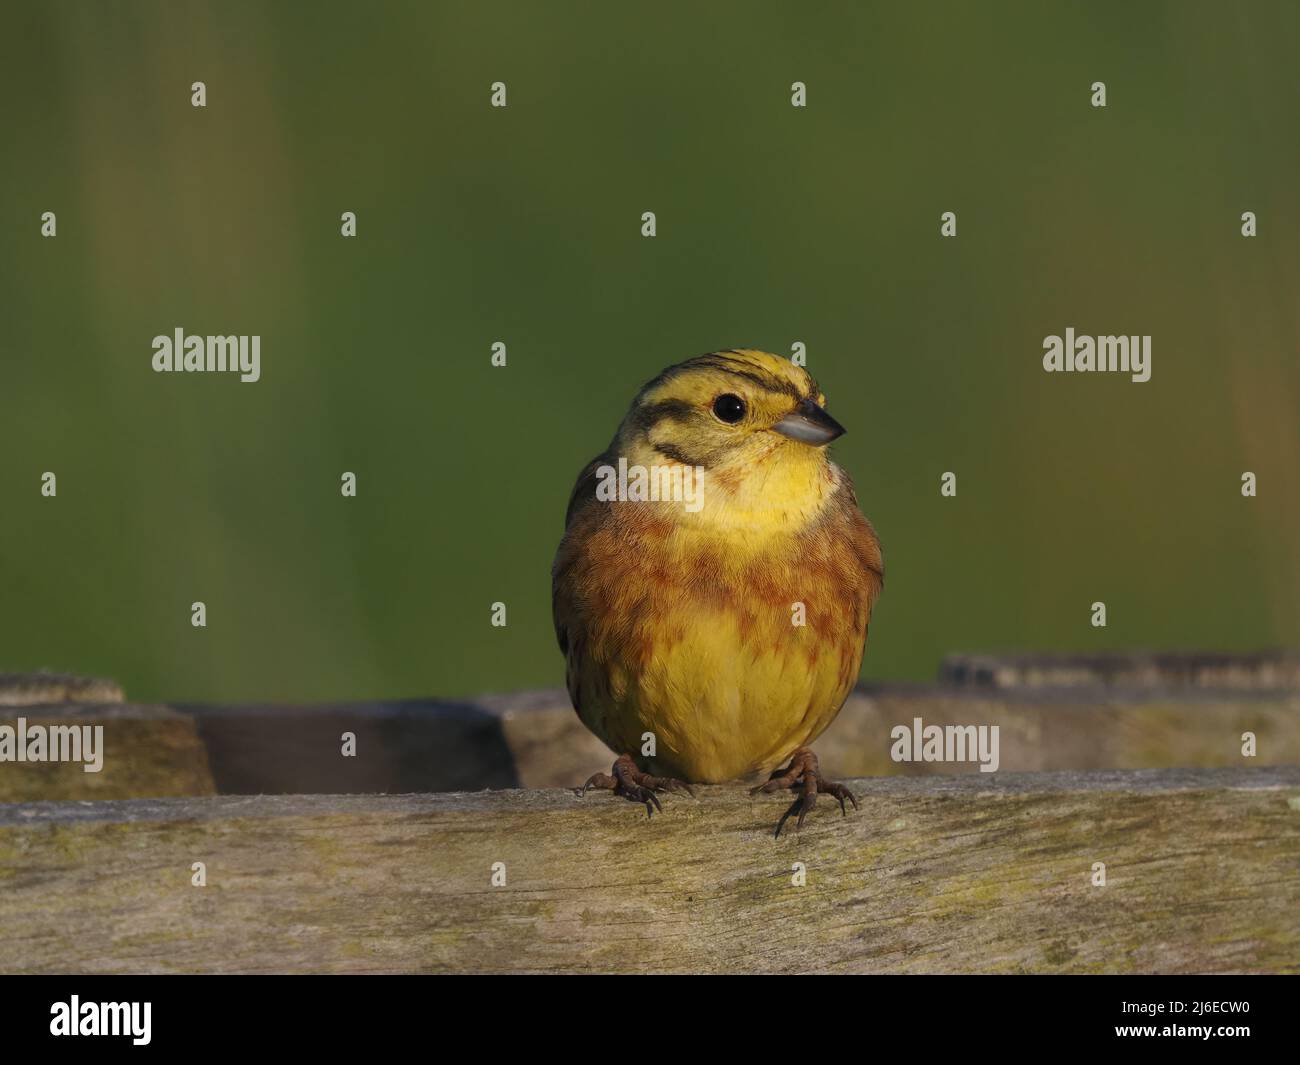 Yellowhammer in breeding season, the images were taken from a walk / cylcle way where they have become more habituated to people passing. Stock Photo